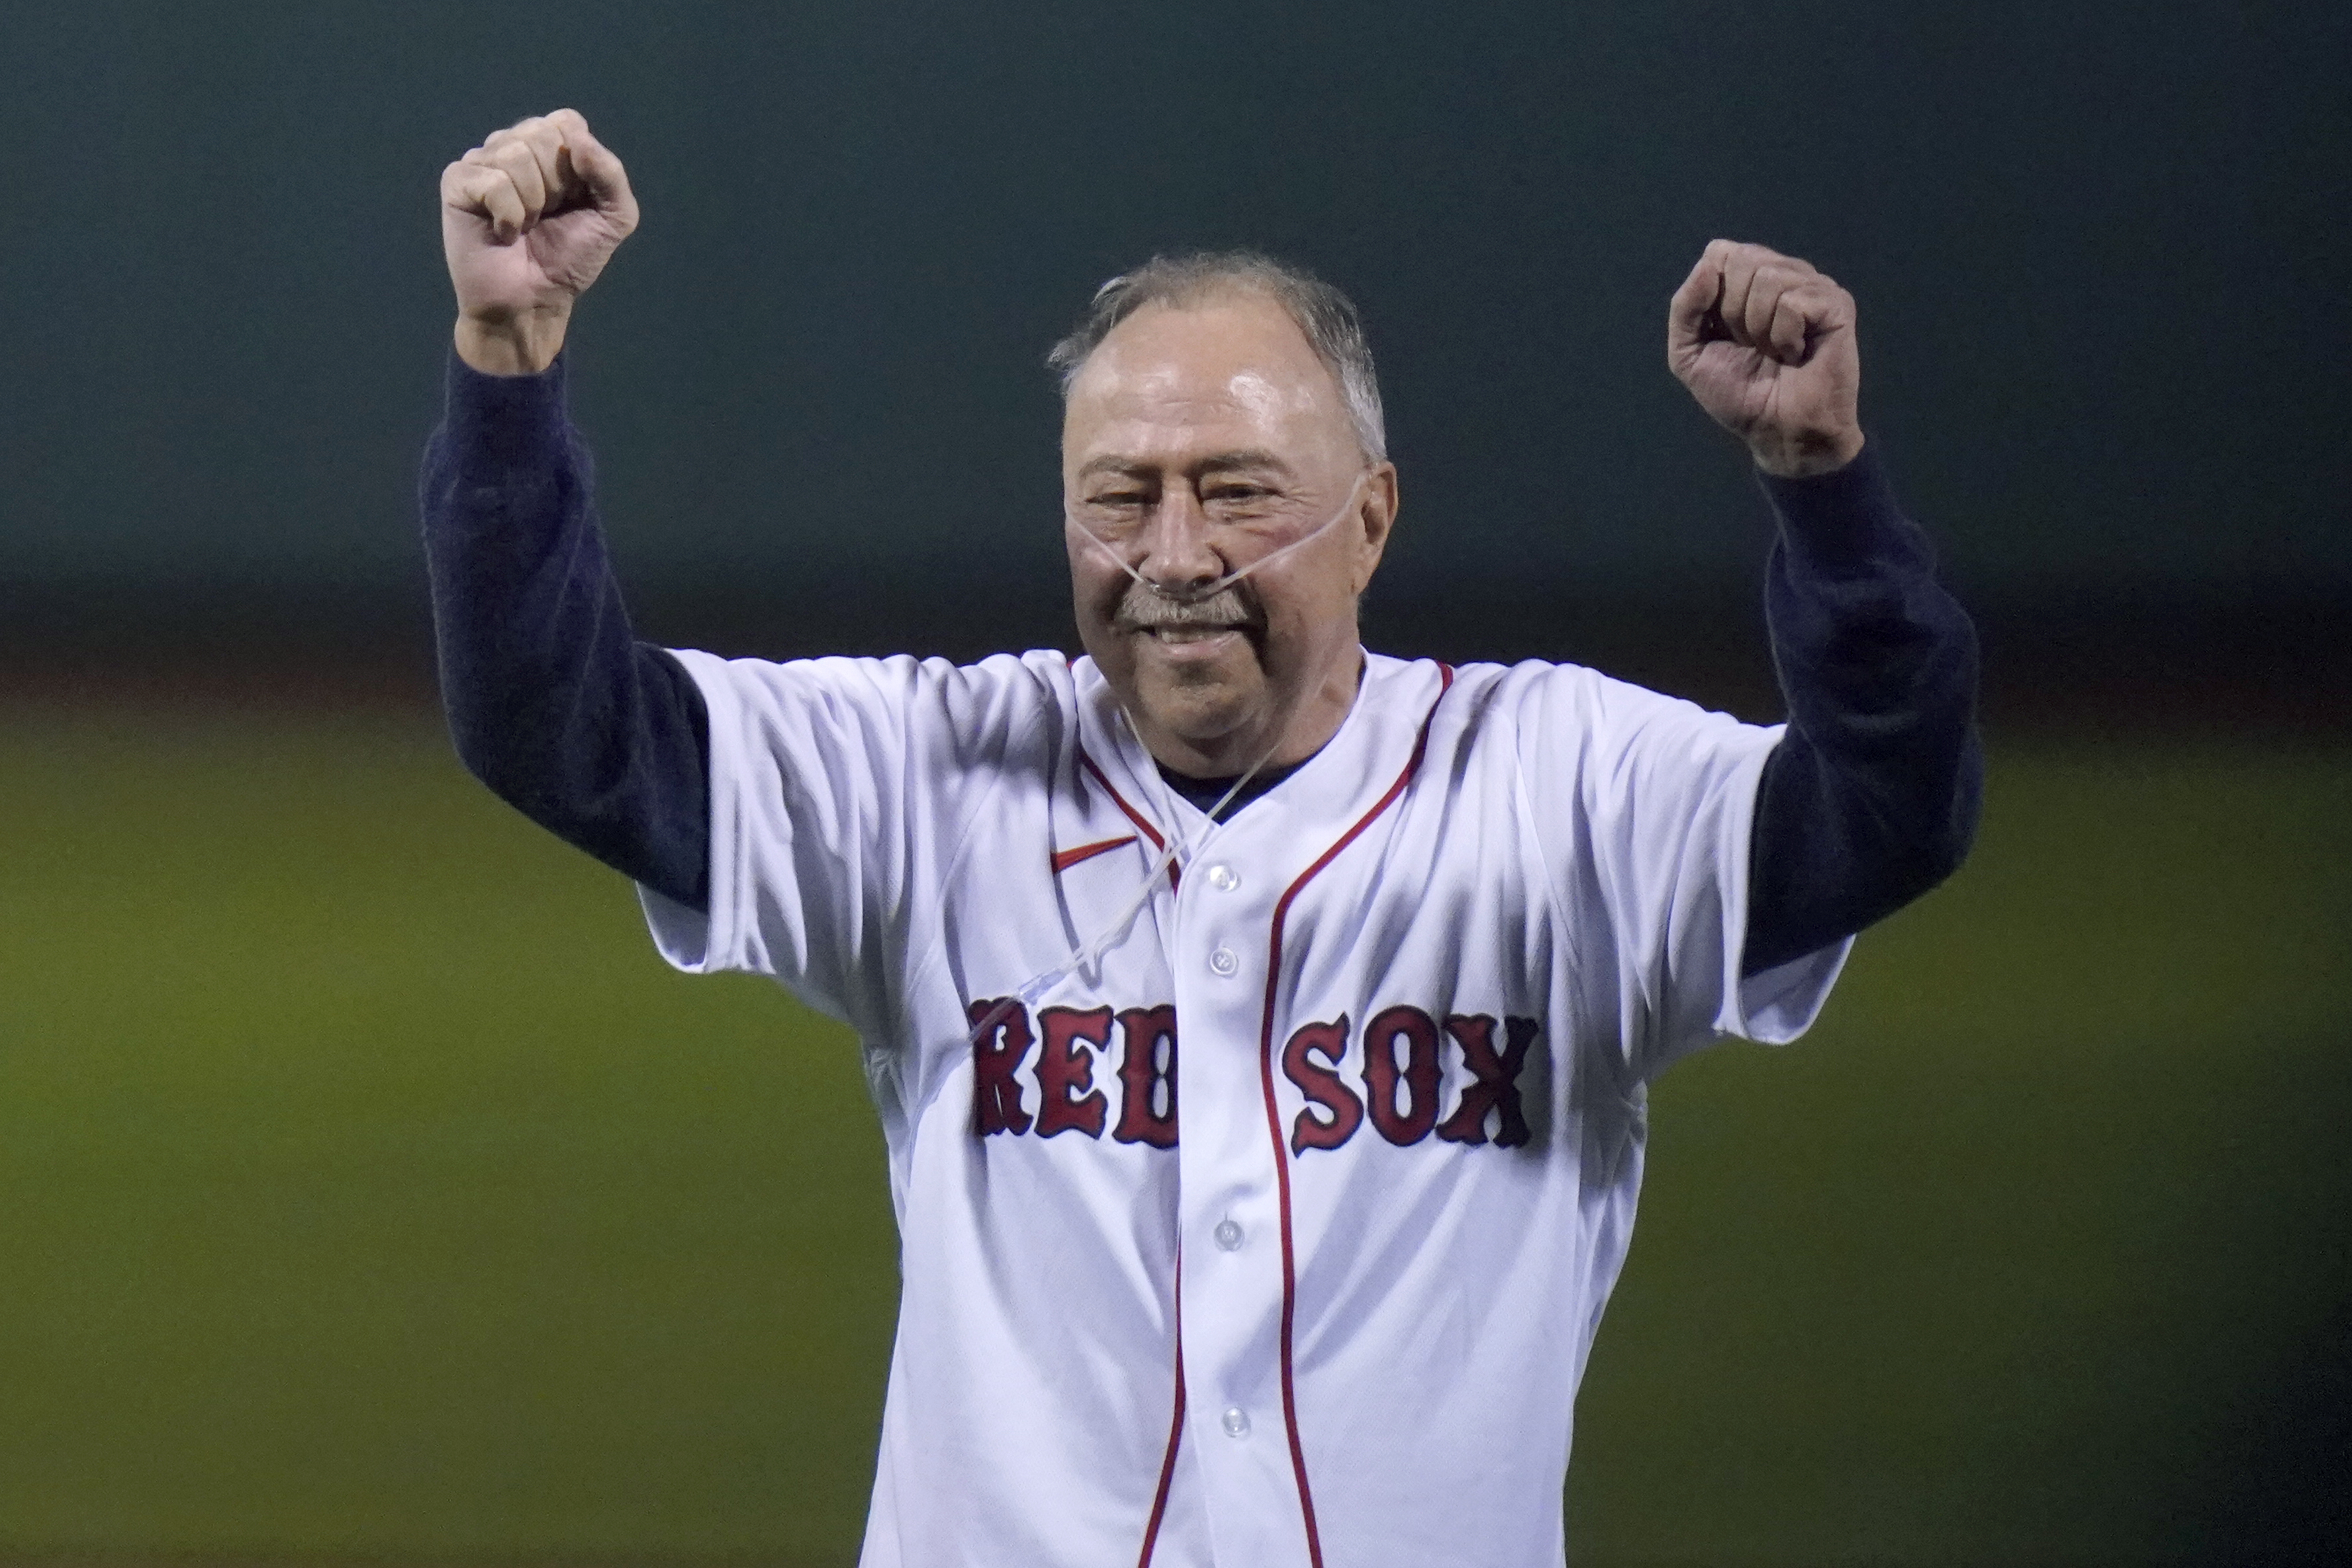 Red Sox legend Jerry Remy celebrated in public wake